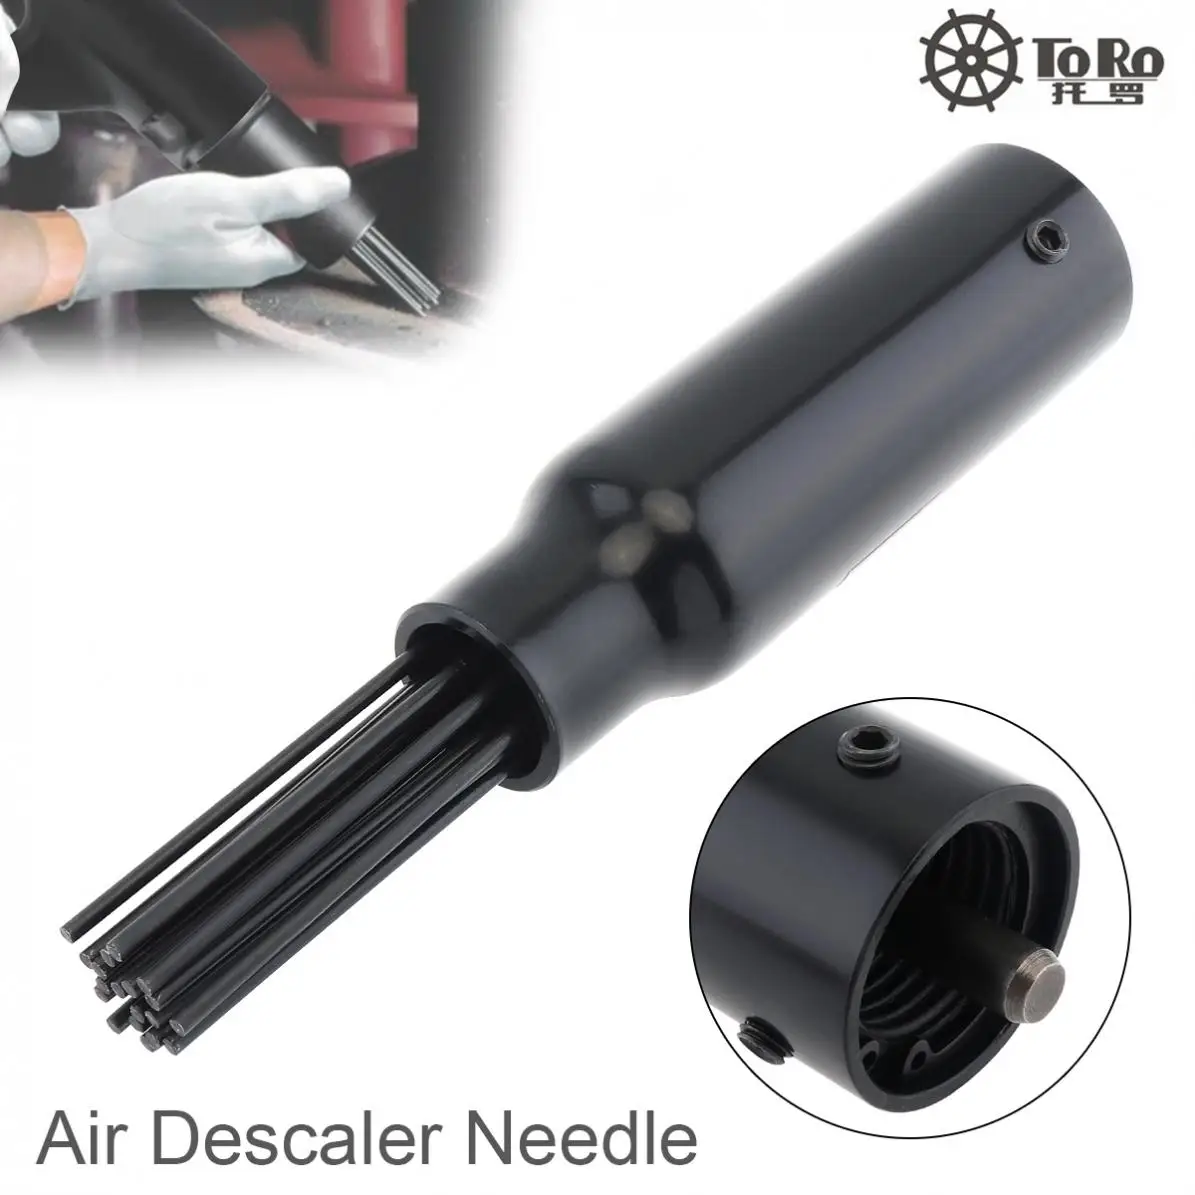 

TR-9190 Black Pneumatic Needle Bundle Deruster Head Pneumatic Tool Accessories with 19 Needle for Rust Removal Welding Slag